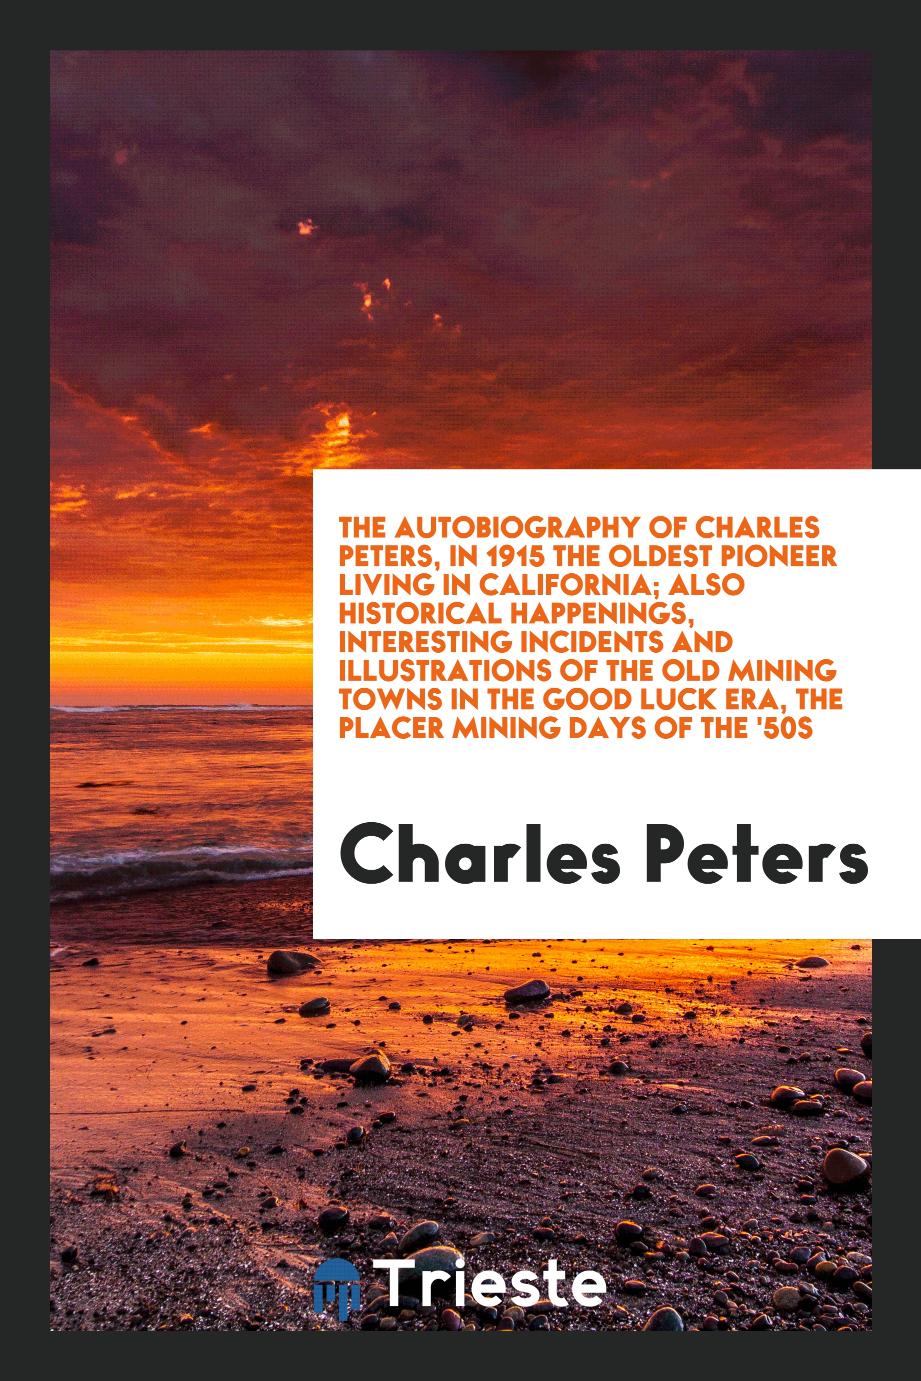 The autobiography of Charles Peters, in 1915 the oldest pioneer living in California; Also historical happenings, interesting incidents and illustrations of the old mining towns in the good luck era, the placer mining days of the '50s